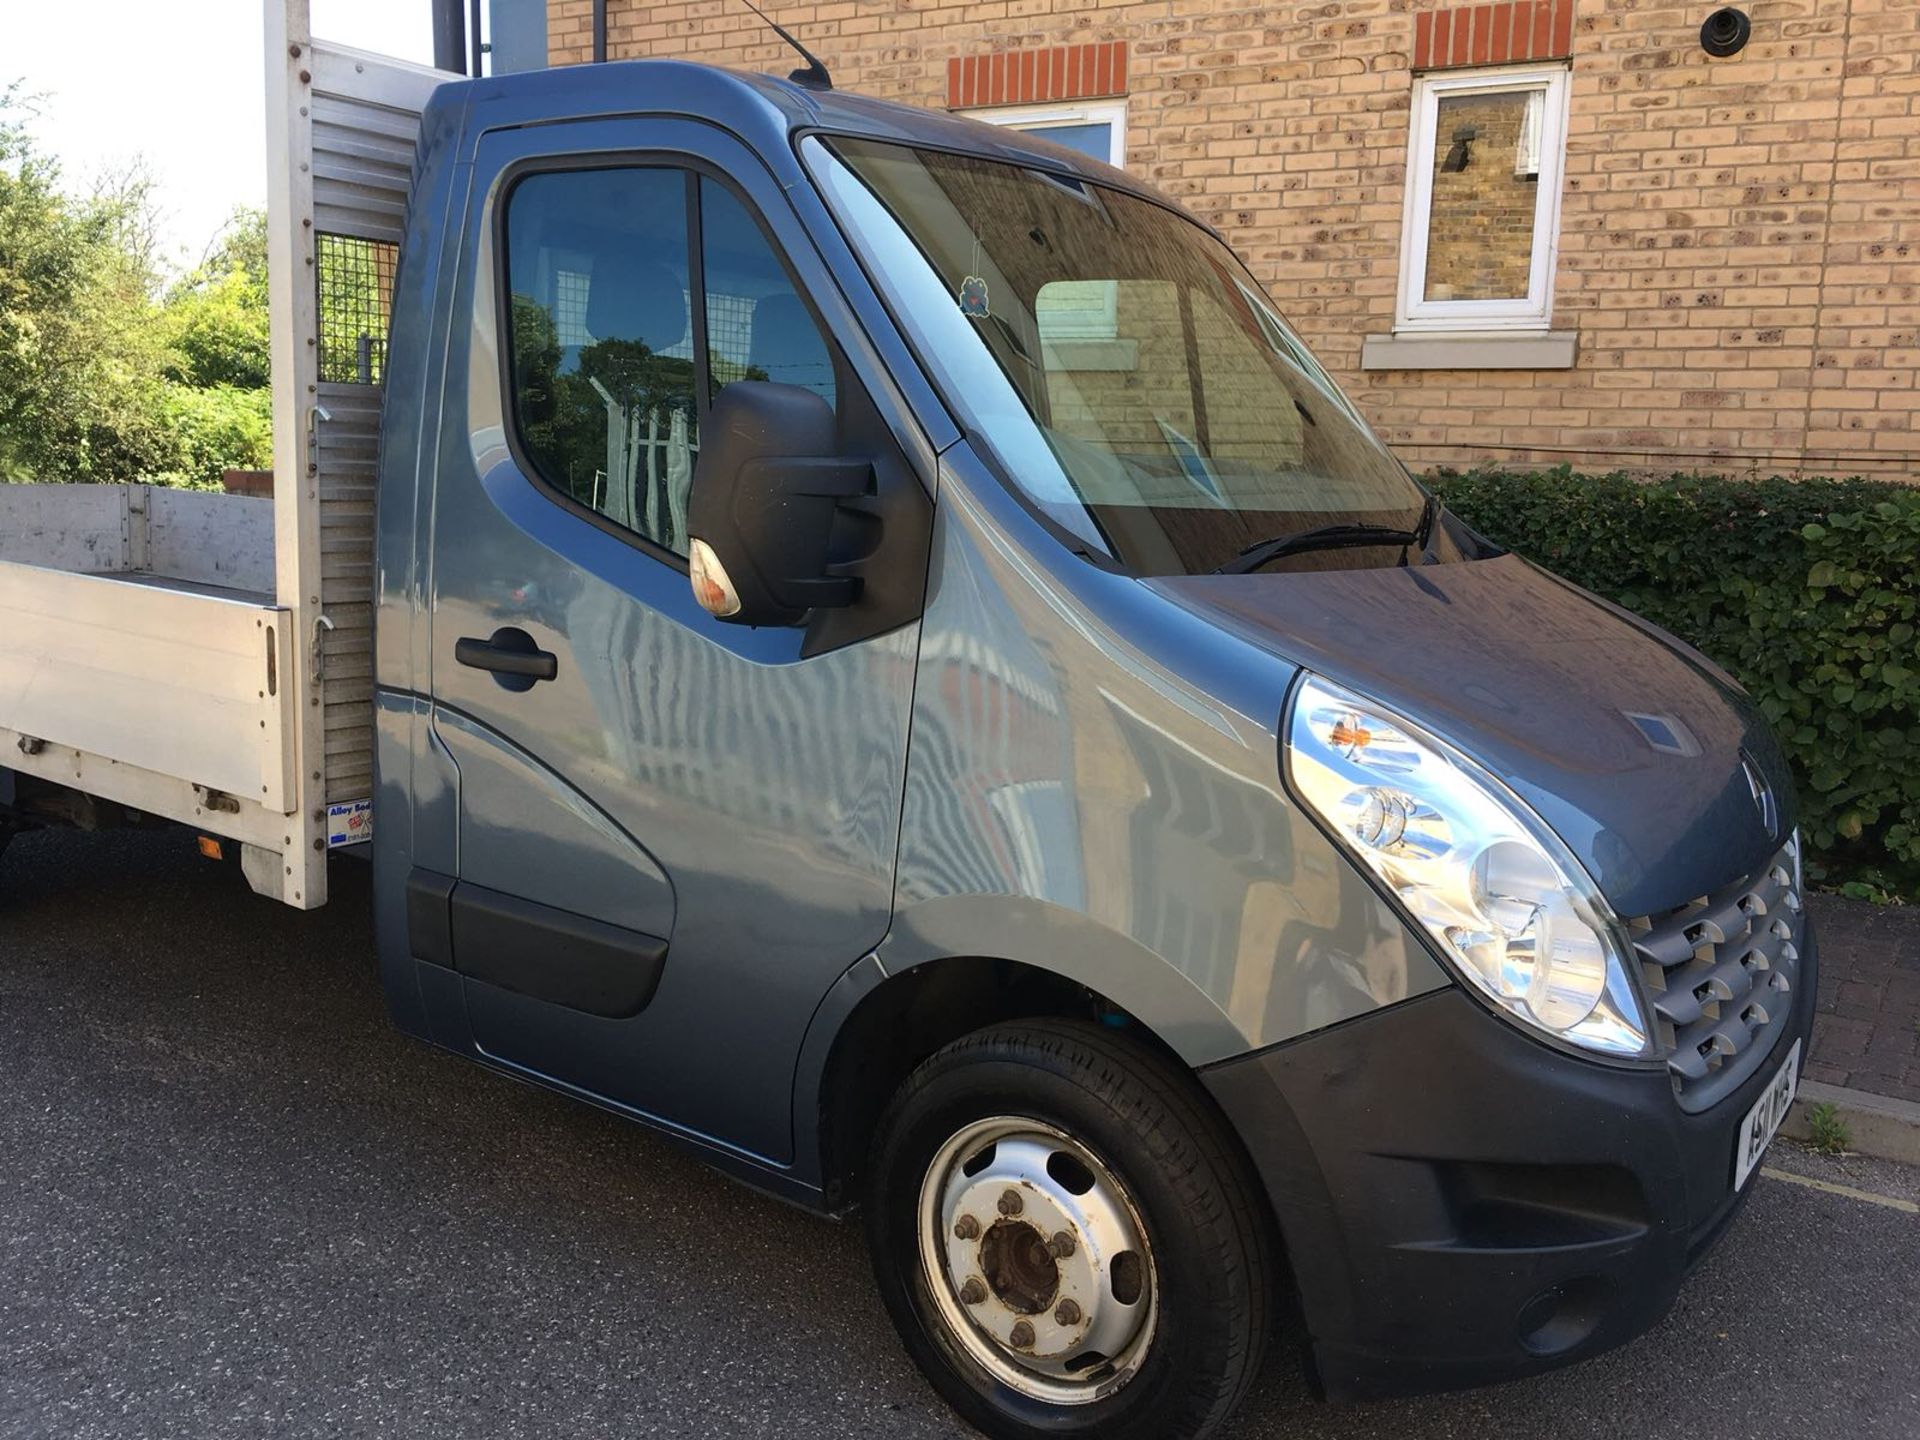 2012 RENAULT MASTER 2.3 DCI LL35 DROPSIDE PICKUP 3.5 TON GROSS TWIN WHEEL. 137,000 MILES. - Image 7 of 26